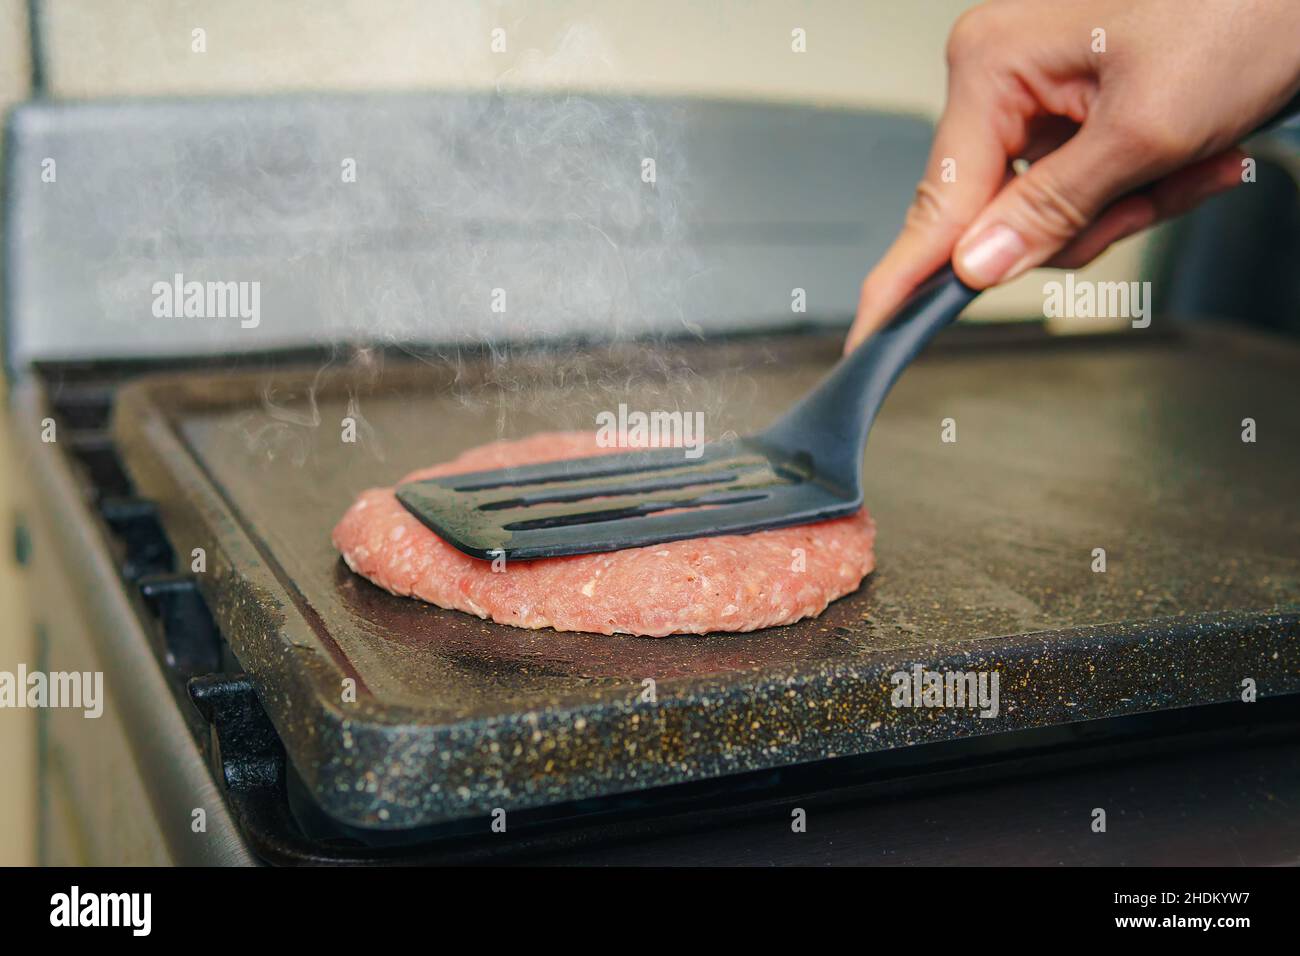 Close-up of a grill where hamburger meat is cooked, beef is cooking, nice atmosphere in the kitchen. Stock Photo